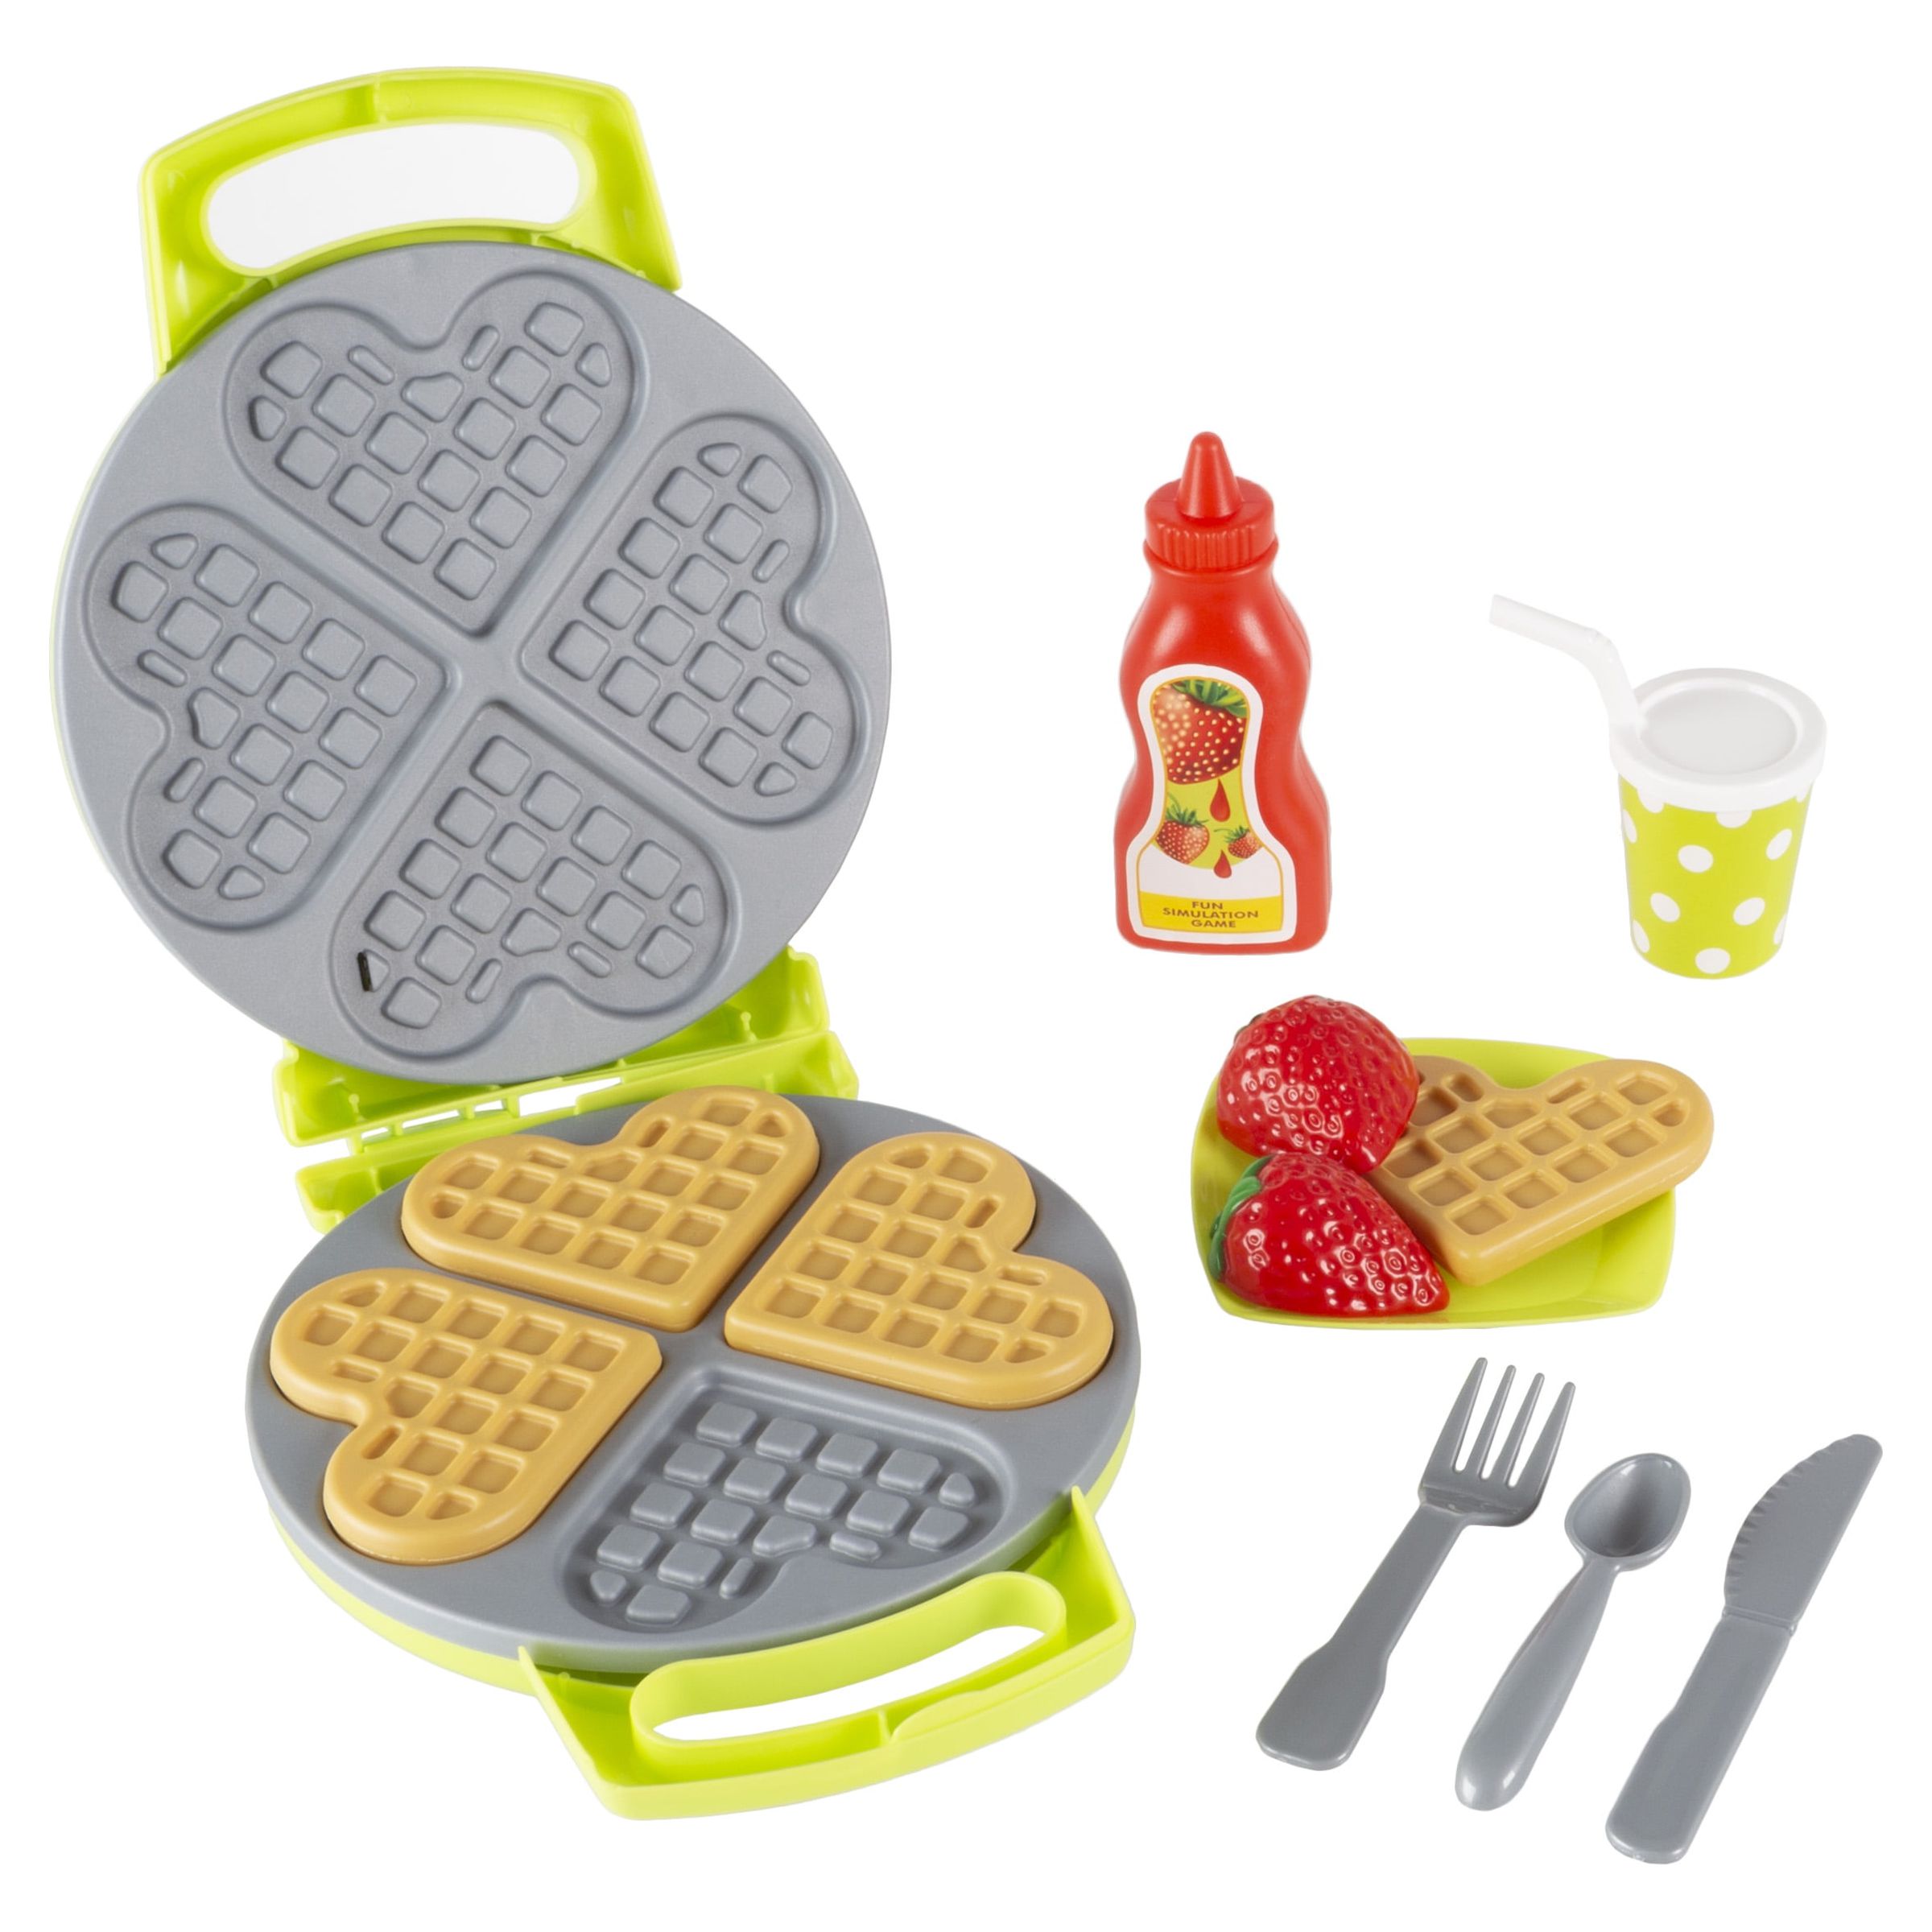 Kids Toy Waffle Iron Set with Music and Lights - Fun Pretend Play Waffle Making Kit by Hey! Play! - image 3 of 7